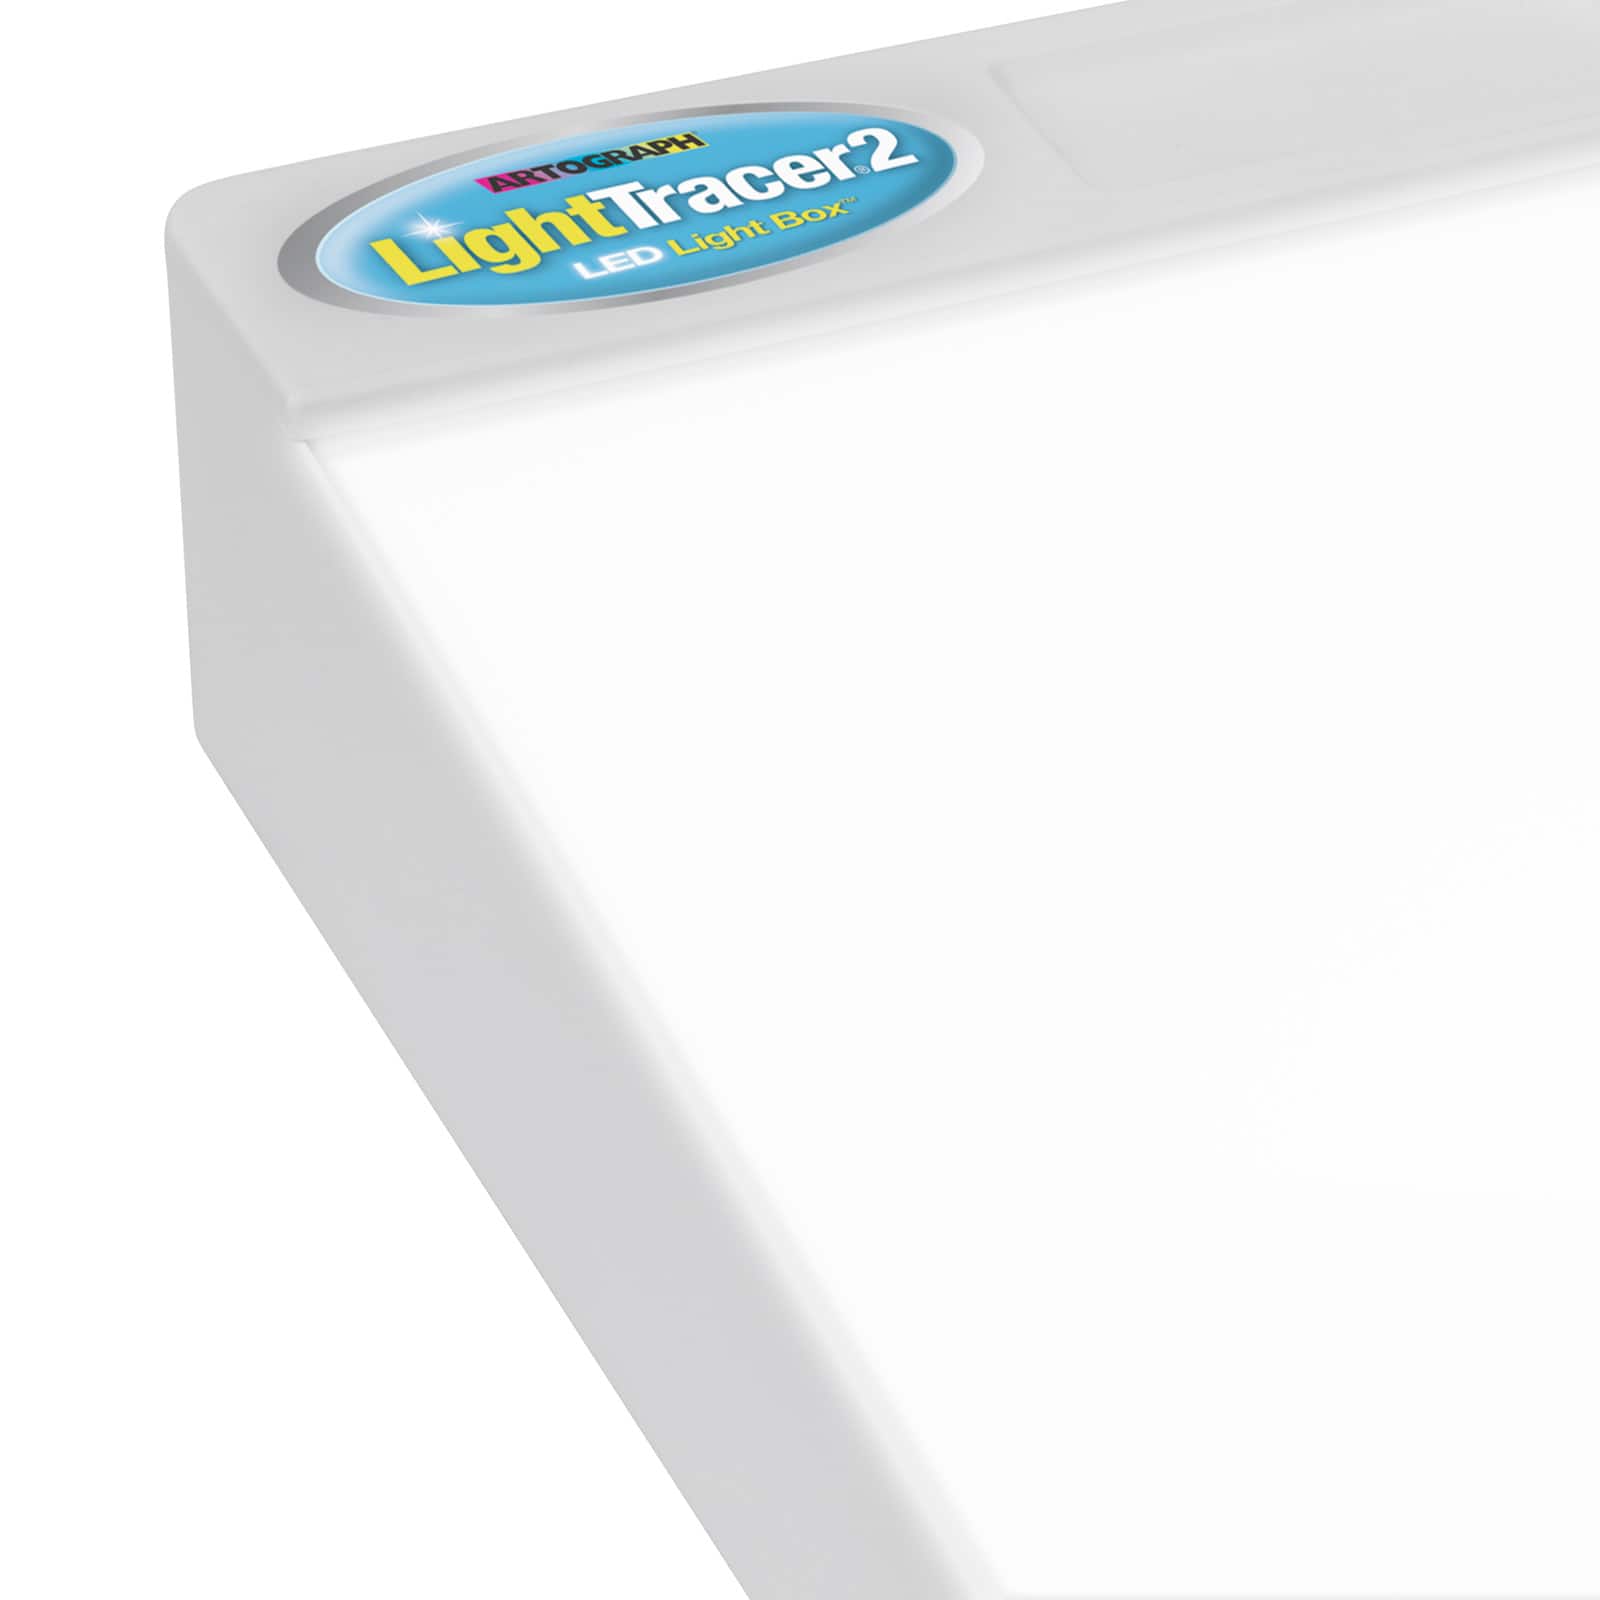 LightTracer 2 LED Lightbox for Art and Craft Image Tracing – artograph